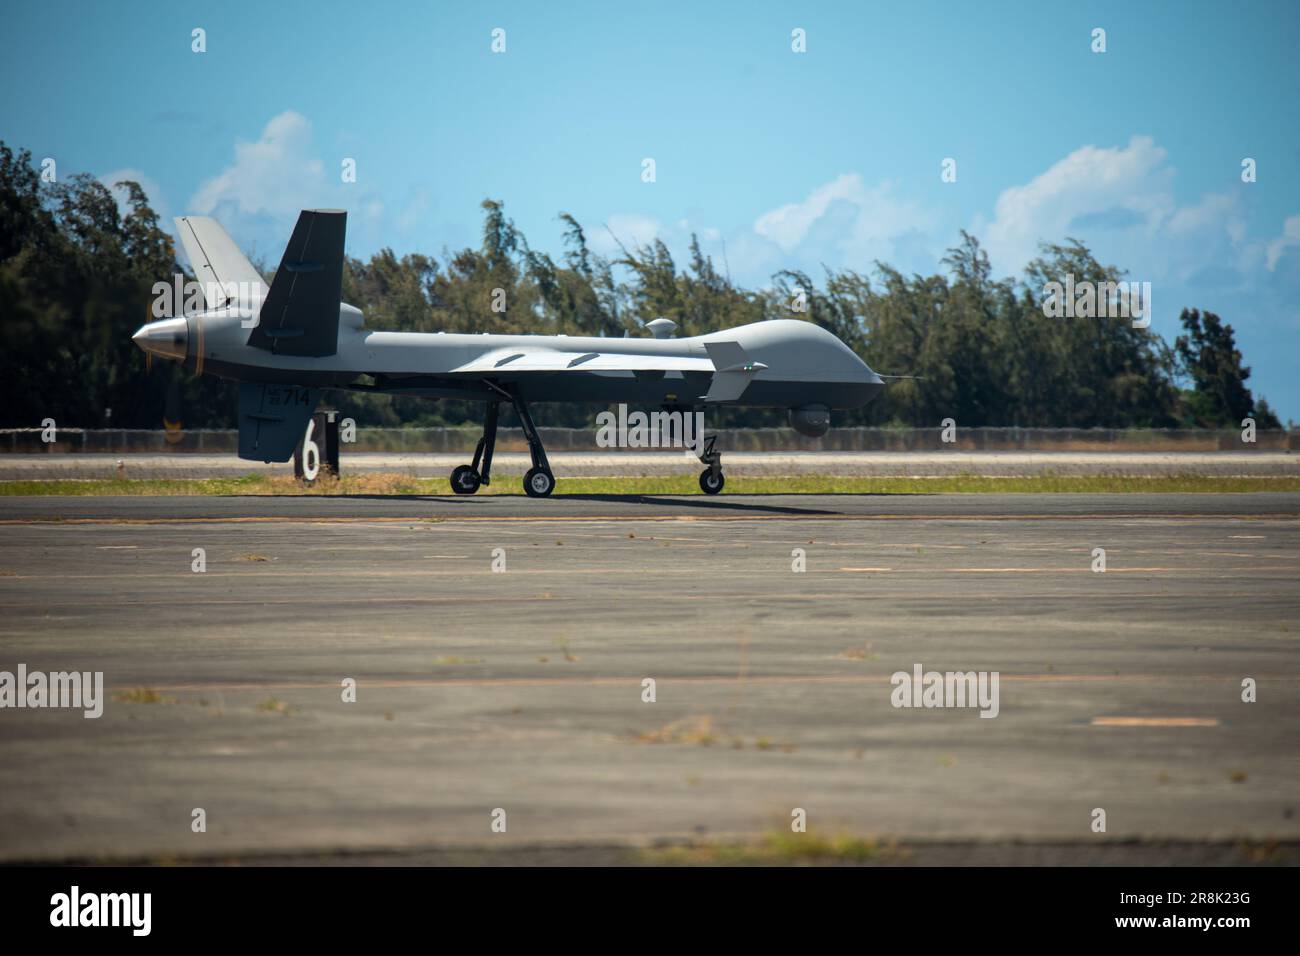 U.S. Marine Corps Marine Unmanned Aerial Vehicle Squadron (VMU) 3, Marine Aircraft Group 24, maneuvers an MQ-9A down the flight line on Marine Corps Air Station Kaneohe Bay, June 20, 2023. The MQ-9A is a remotely piloted aircraft capable of supporting a wide range of operations such as coastal and border surveillance, weapons tracking, embargo enforcement, humanitarian and disaster assistance, support of peacekeeping and counter-narcotic operations. VMU-3 supports the Marine Air-Ground Task Force by providing multi-surveillance and reconnaissance, data gateway and relay capabilities through an Stock Photo